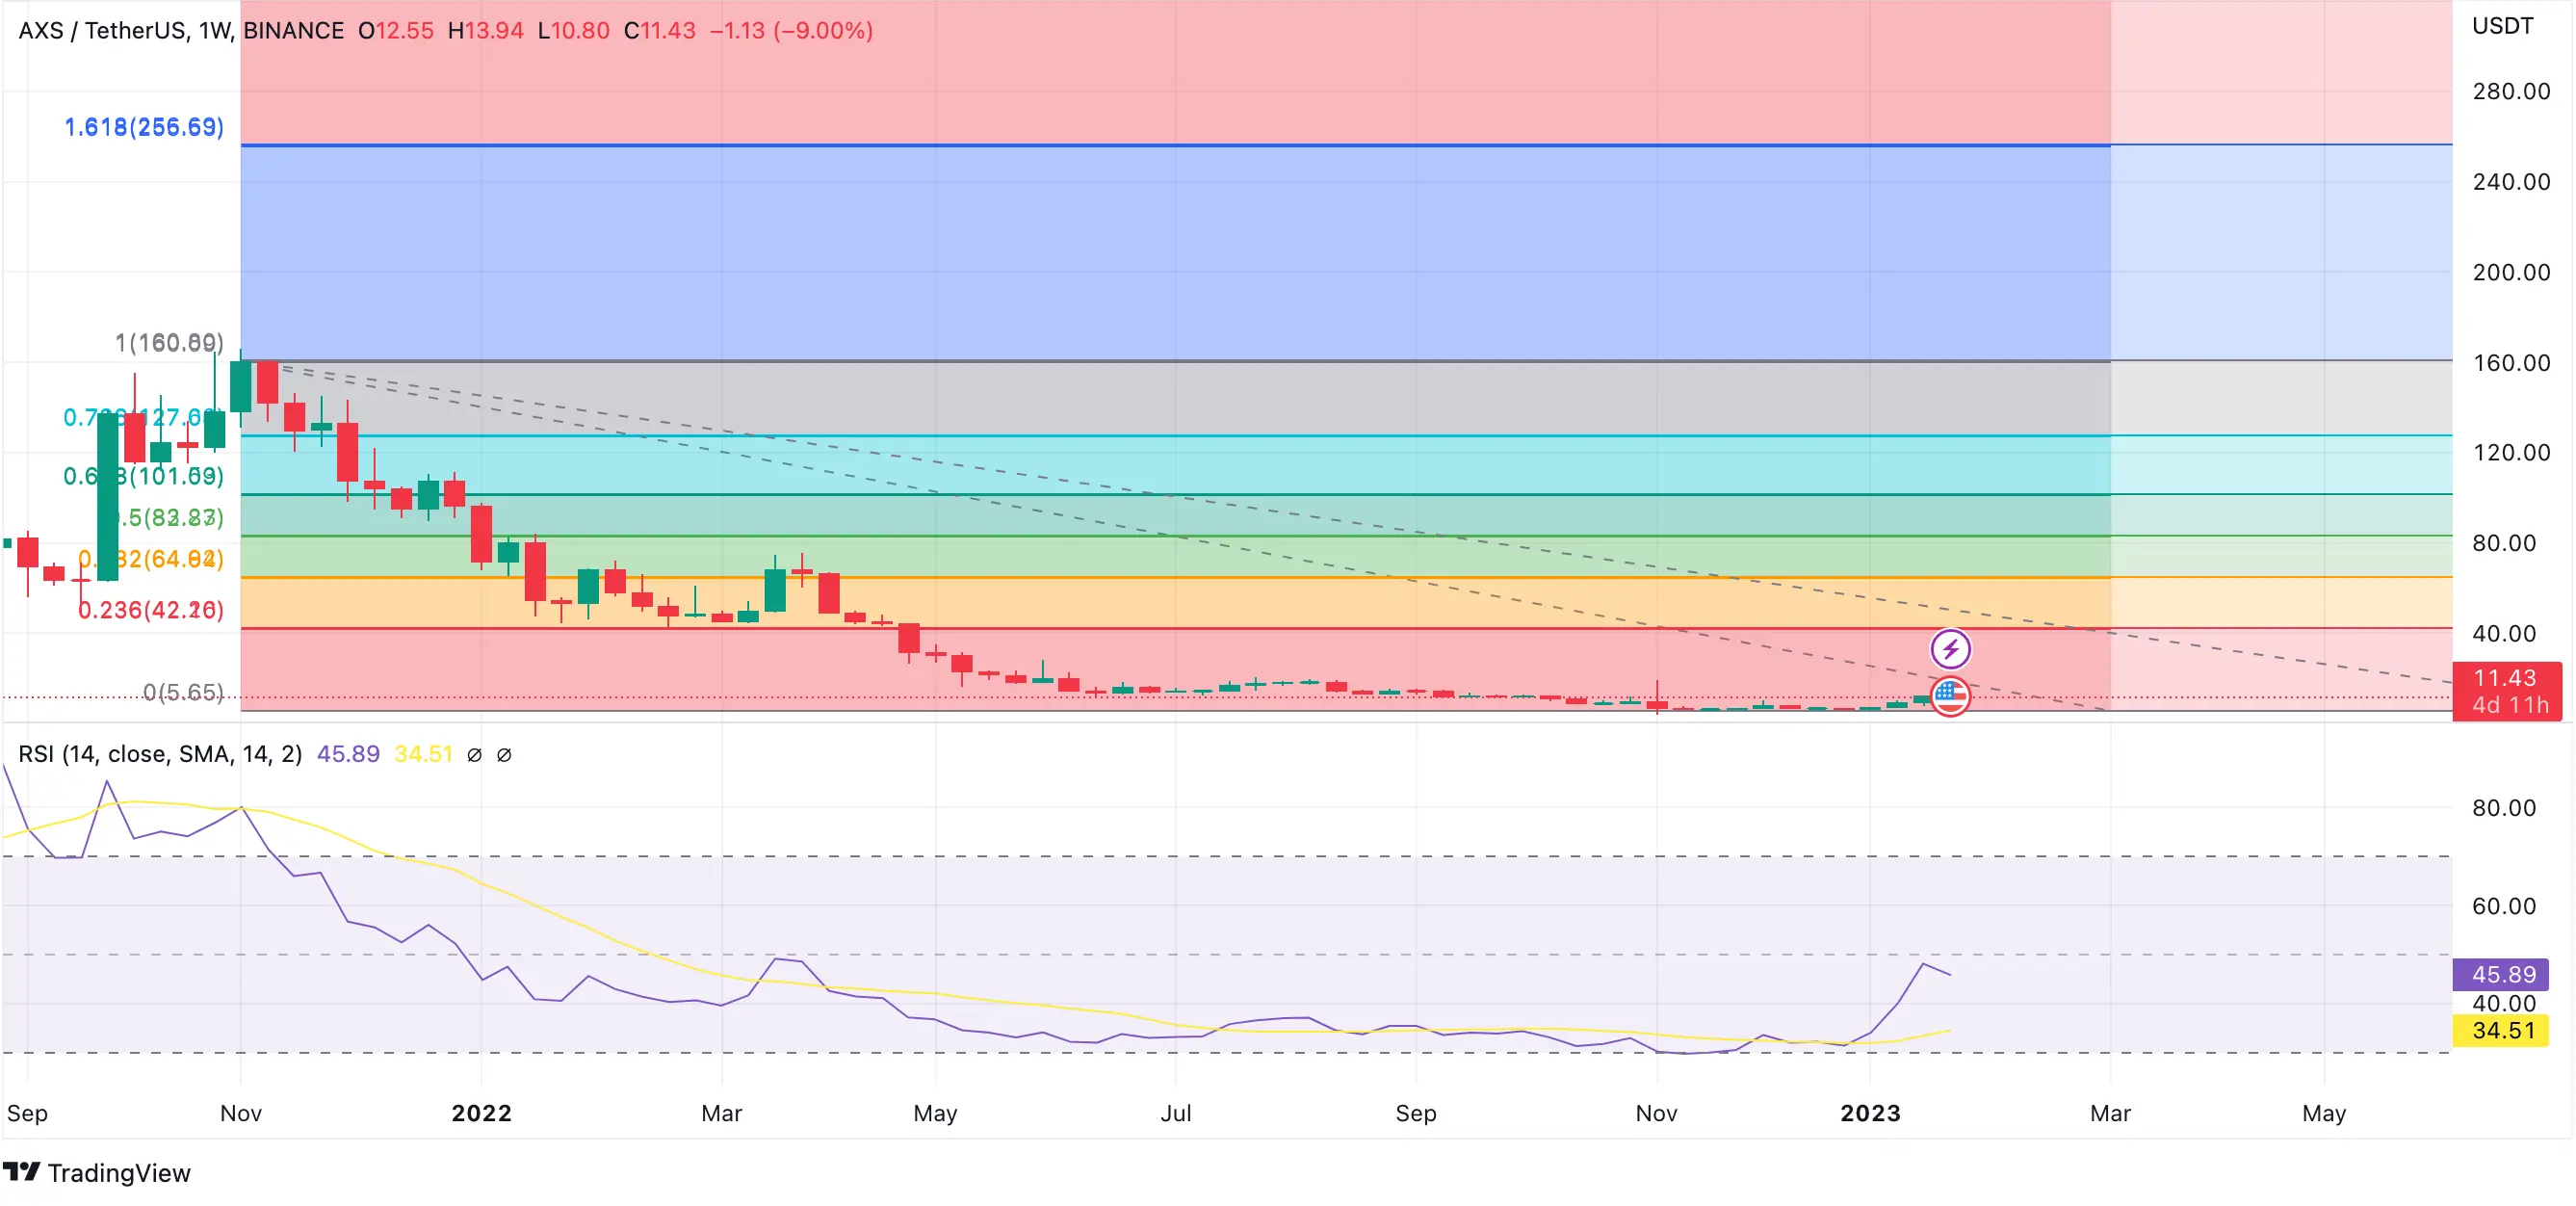 axs to usd price chart and technical analysis